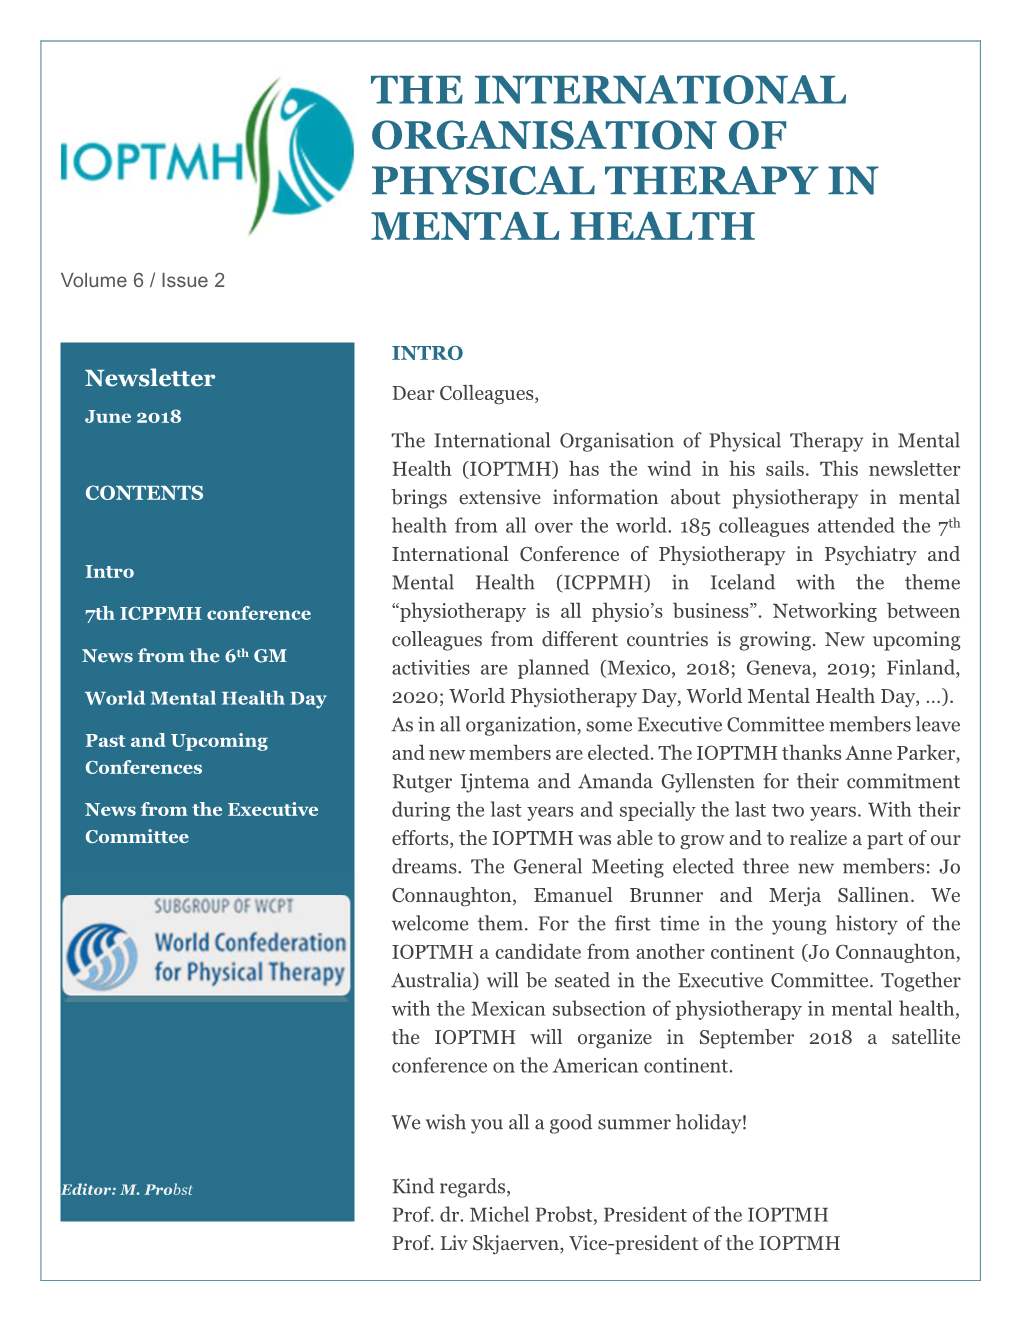 The International Organisation of Physical Therapy in Mental Health